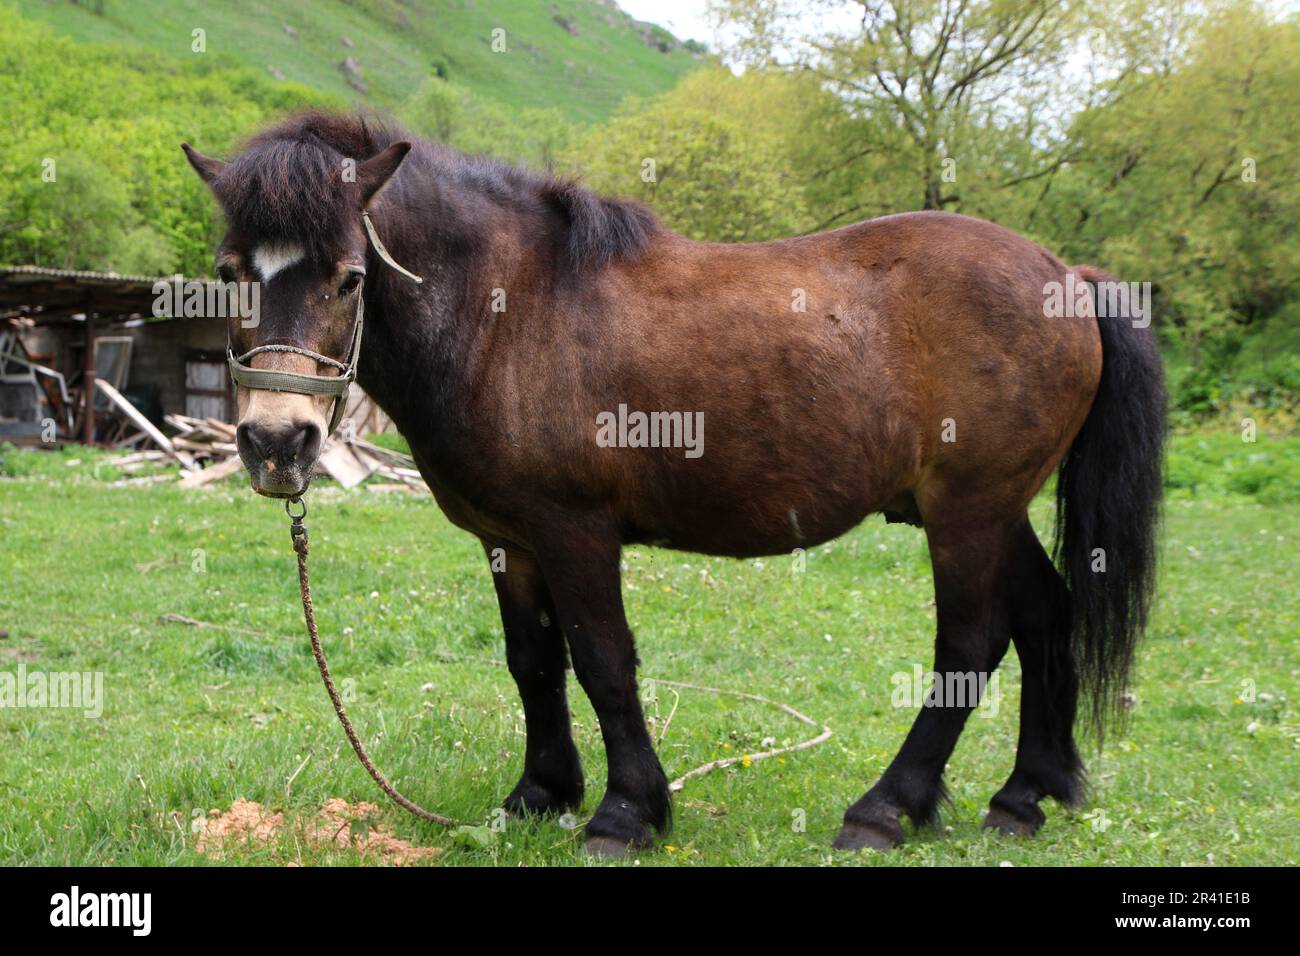 A Pony (Horse) seen in a meadow in the Caucasus Mountains on the territory of the Republic of Karachay-Cherkessia, near Honey Waterfalls, in the Russian Federation. Stock Photo